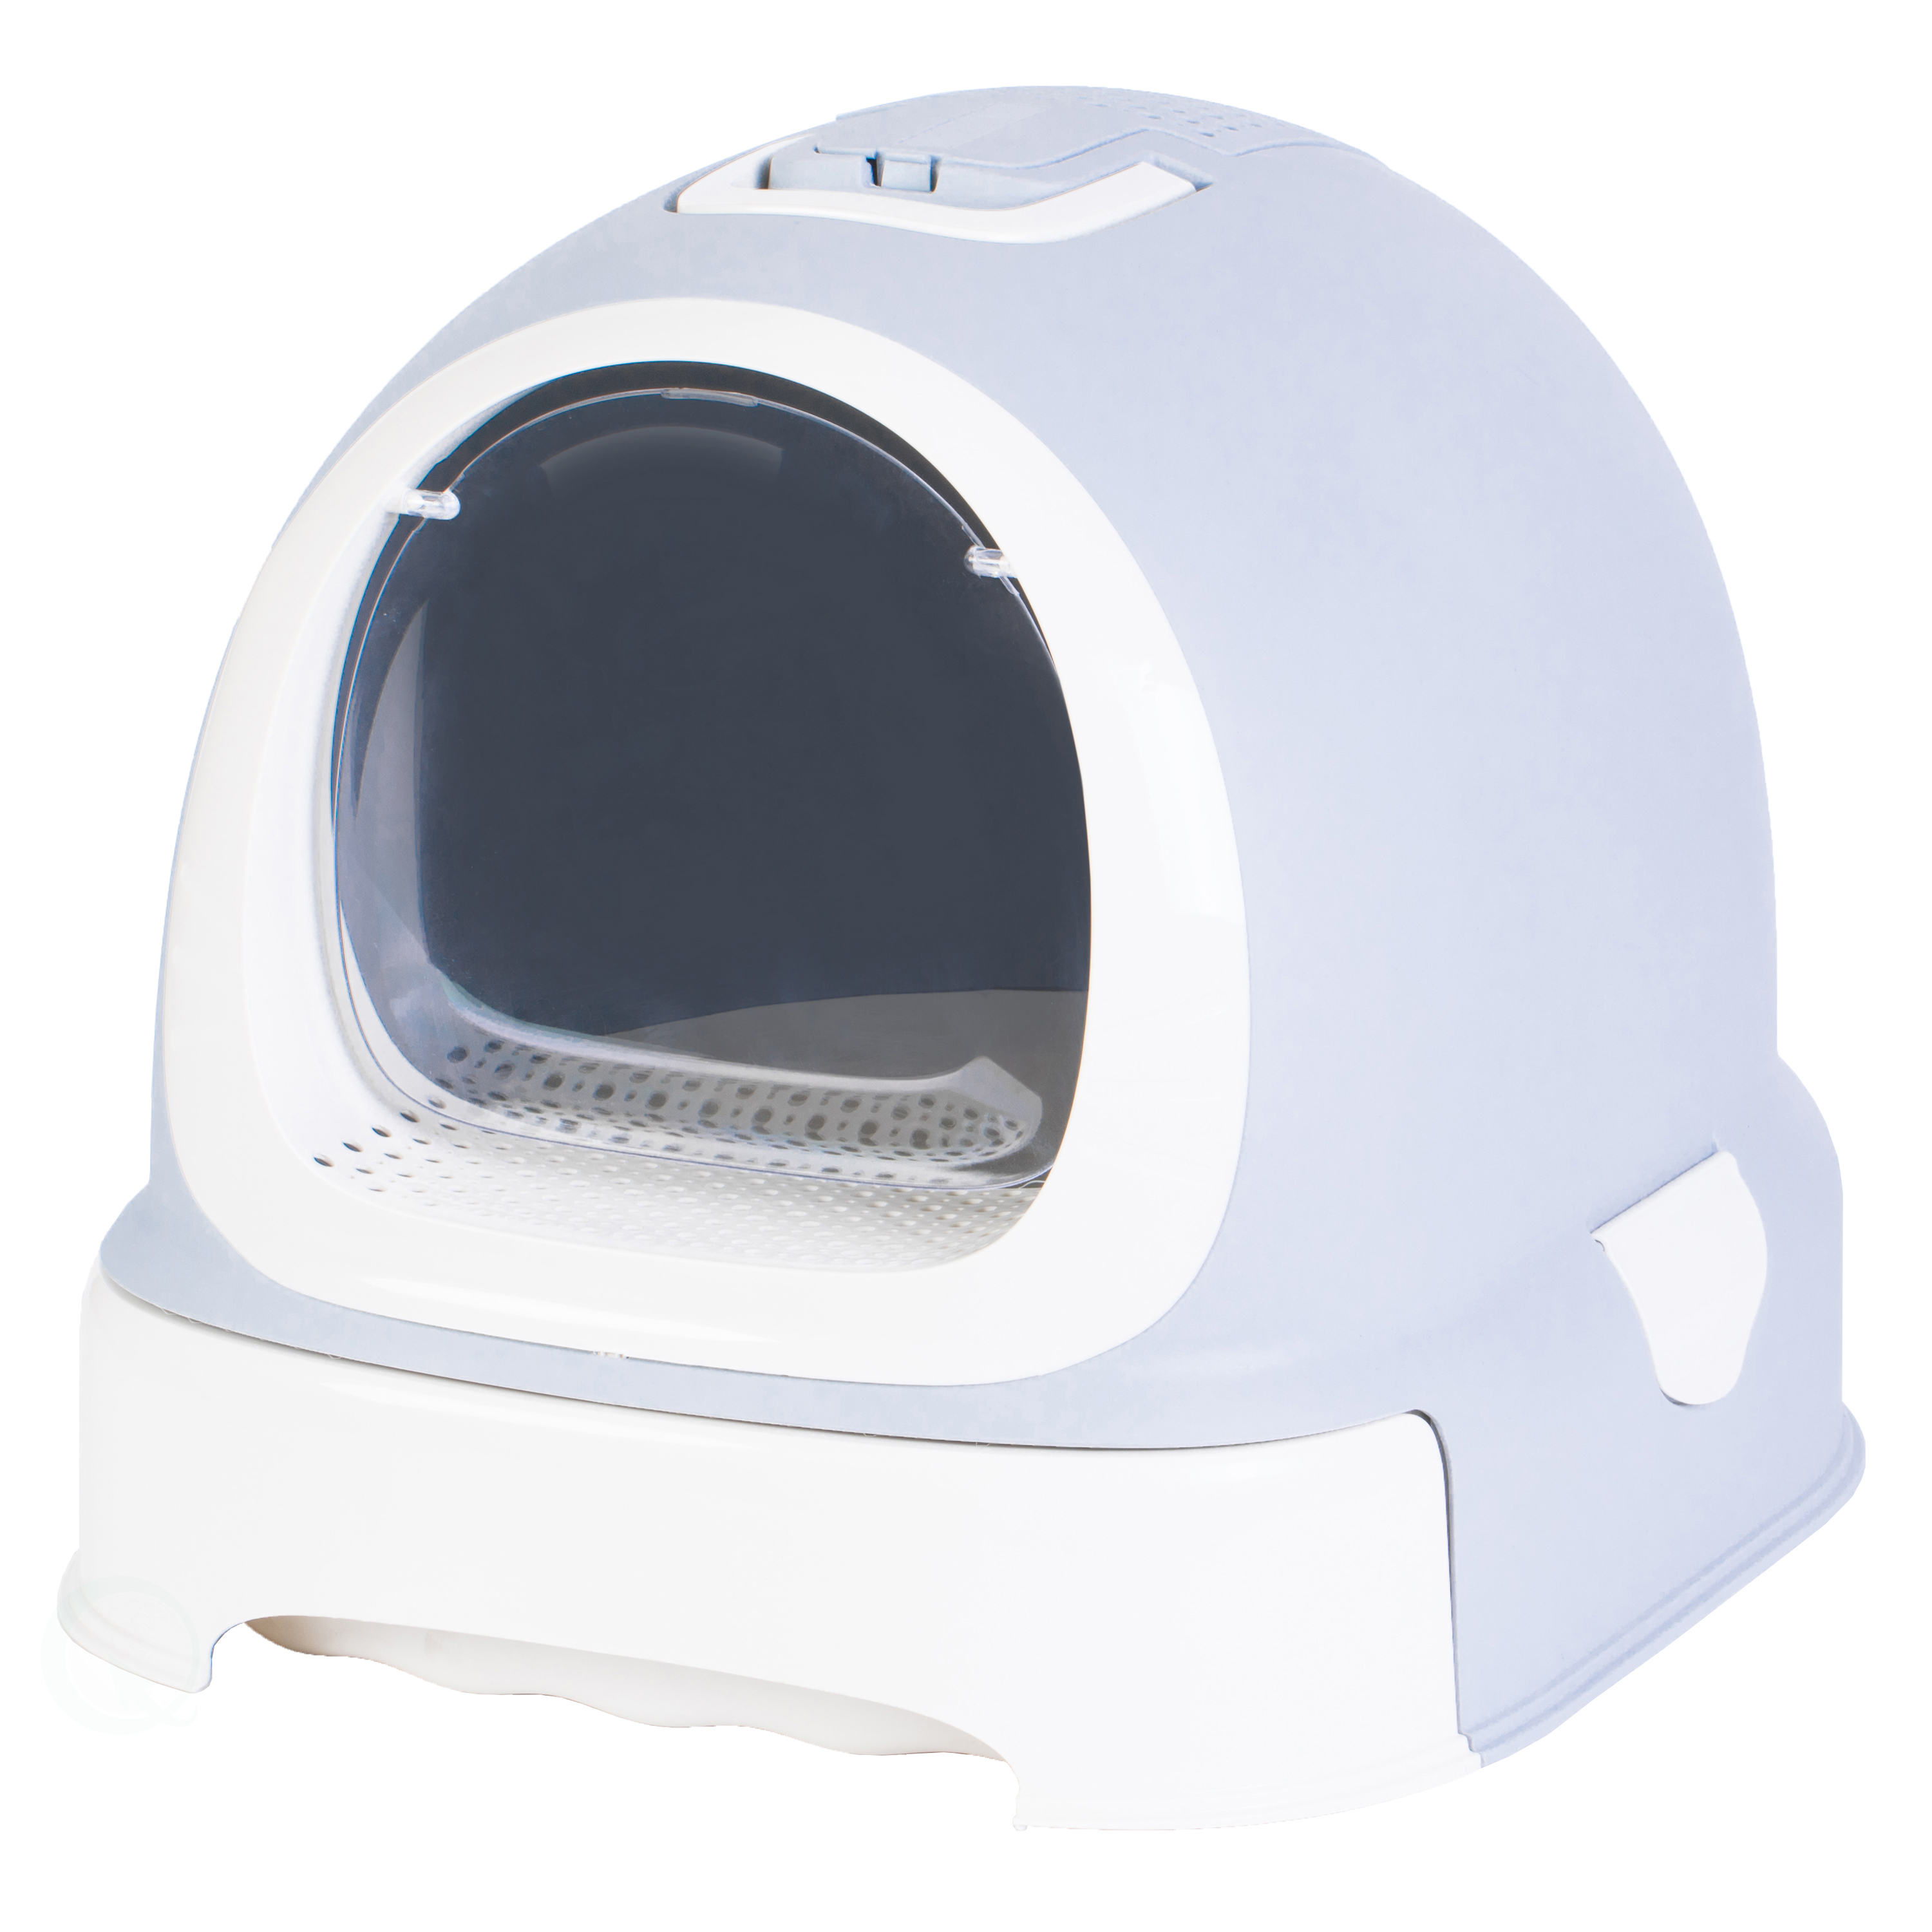 Fully Enclosed Hooded Litter Pan With Front Entry Odor Close Door, Cat Litter Scoop Included - Litter Box